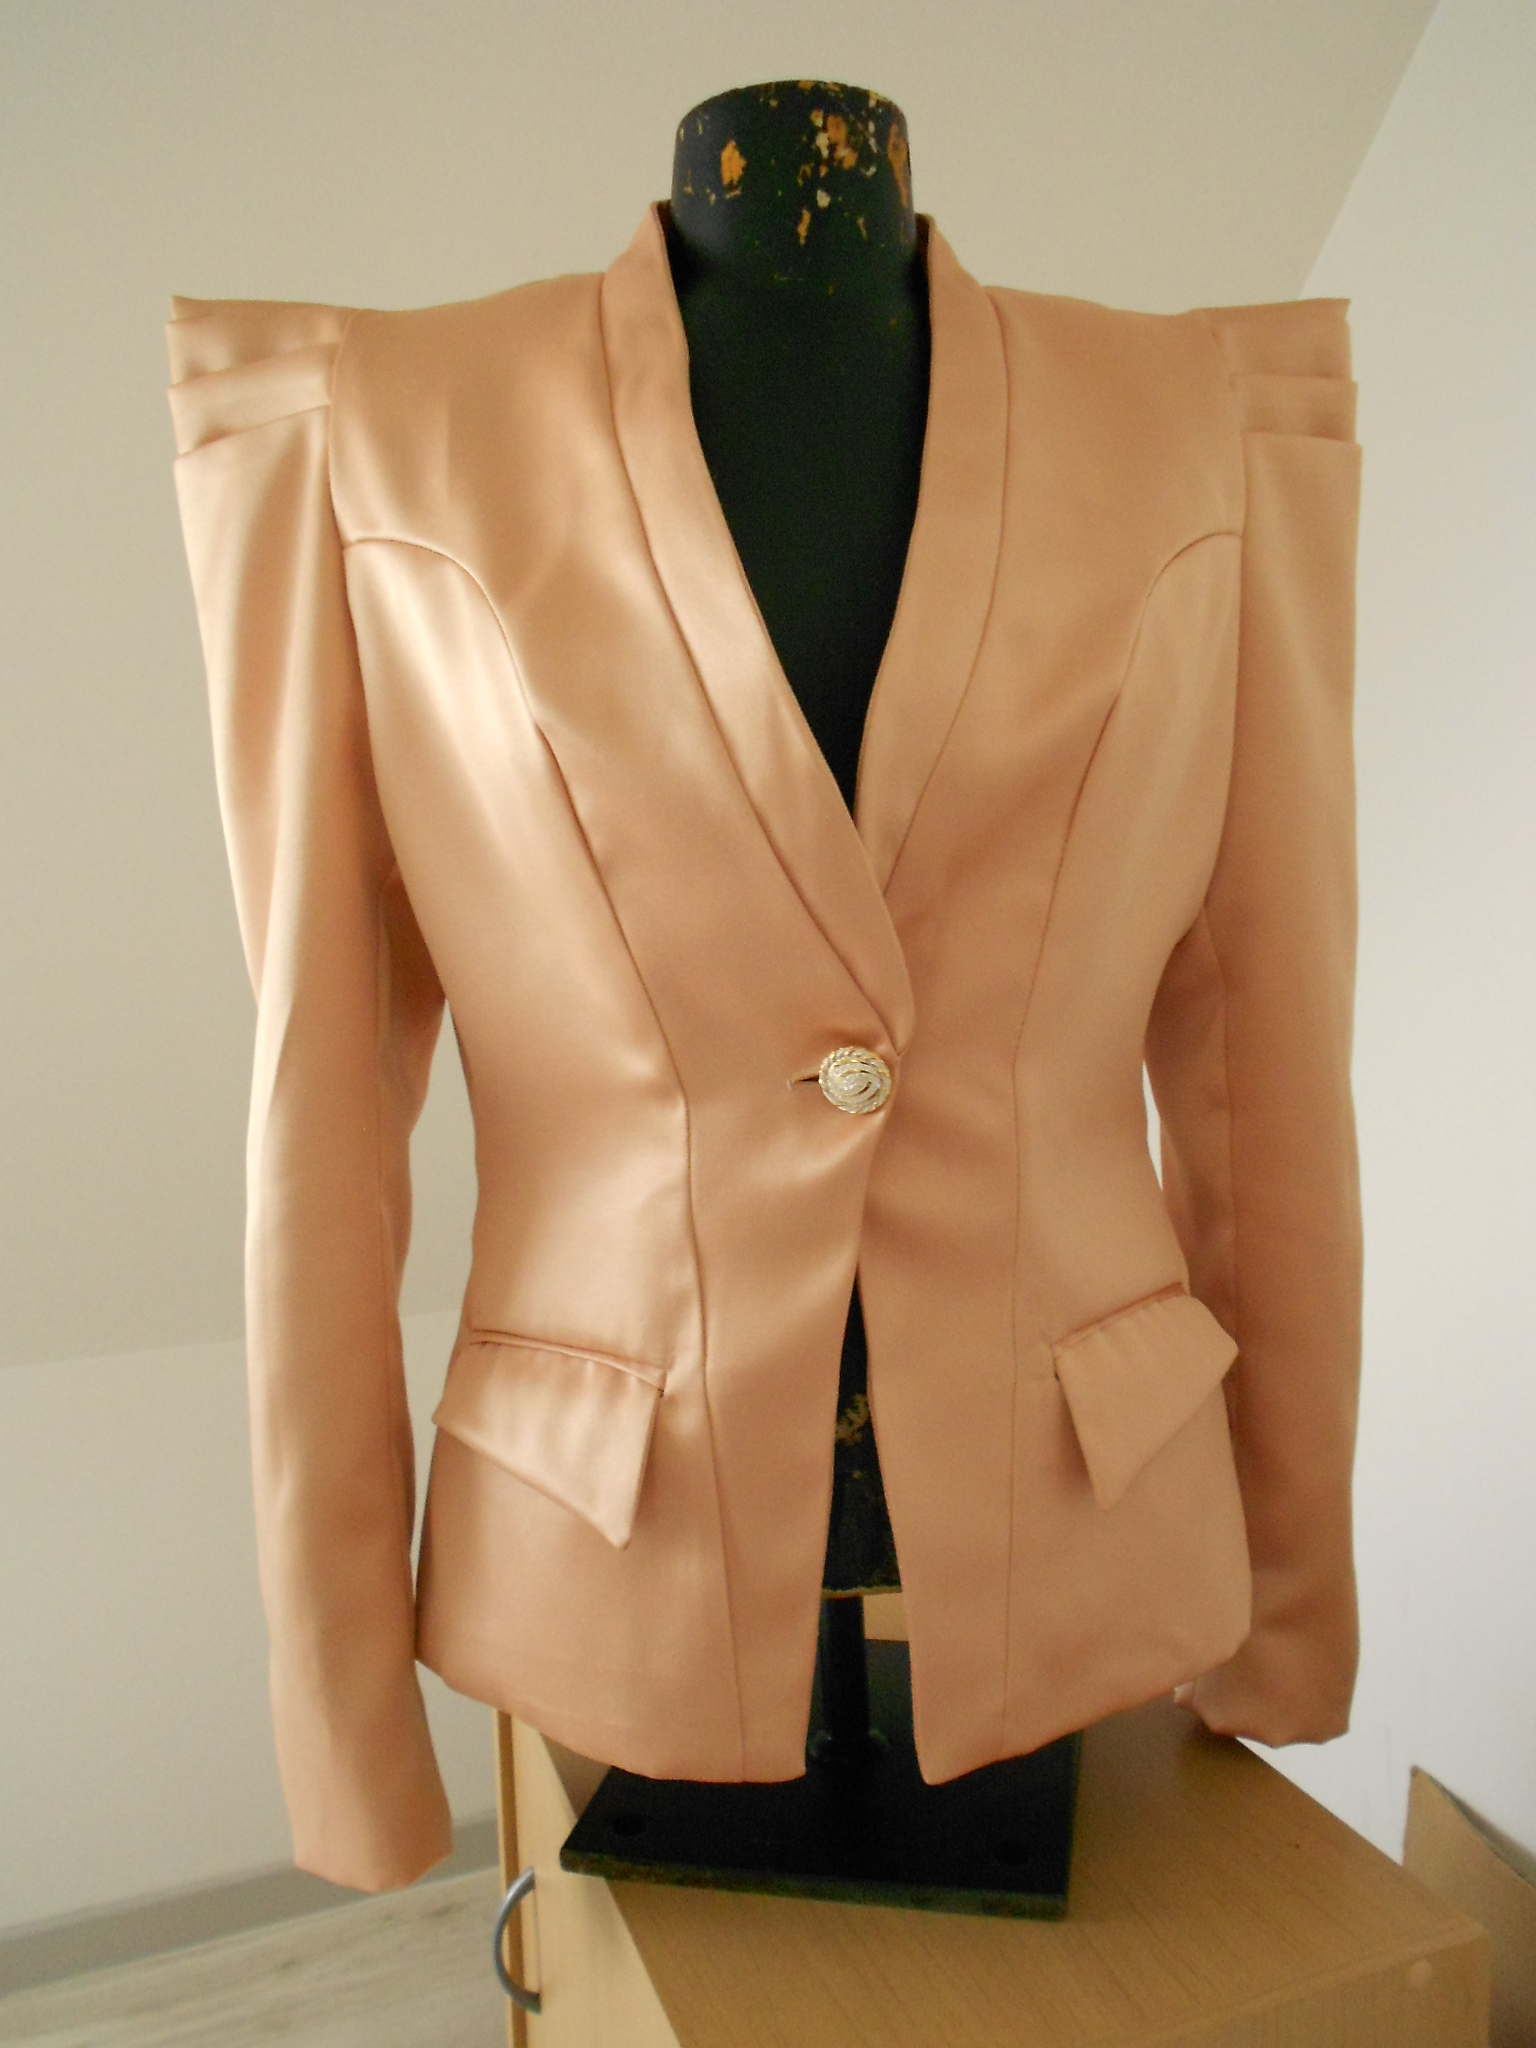 Jacket with cowl sleeves – Sewing Projects | BurdaStyle.com